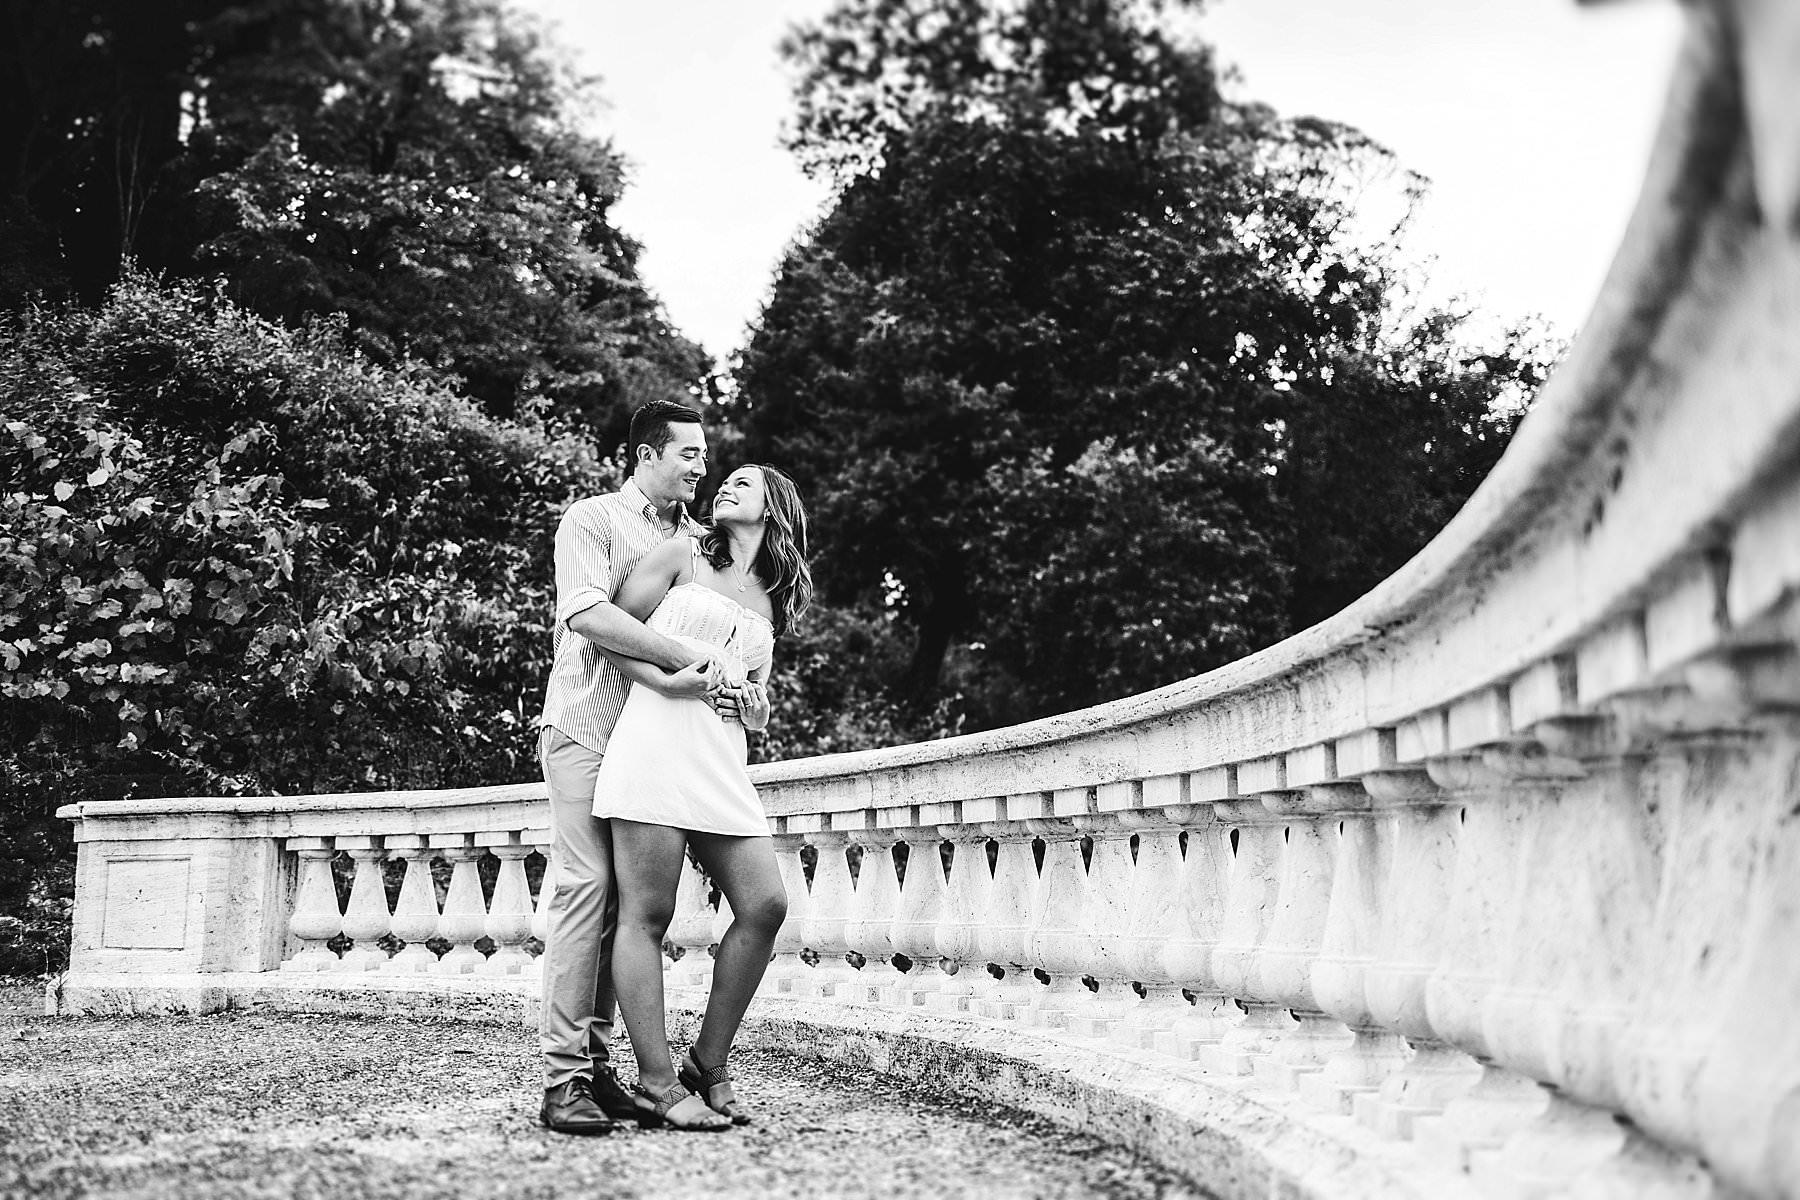 Exciting and fun couple engagement photo shoot in Florence, Italy